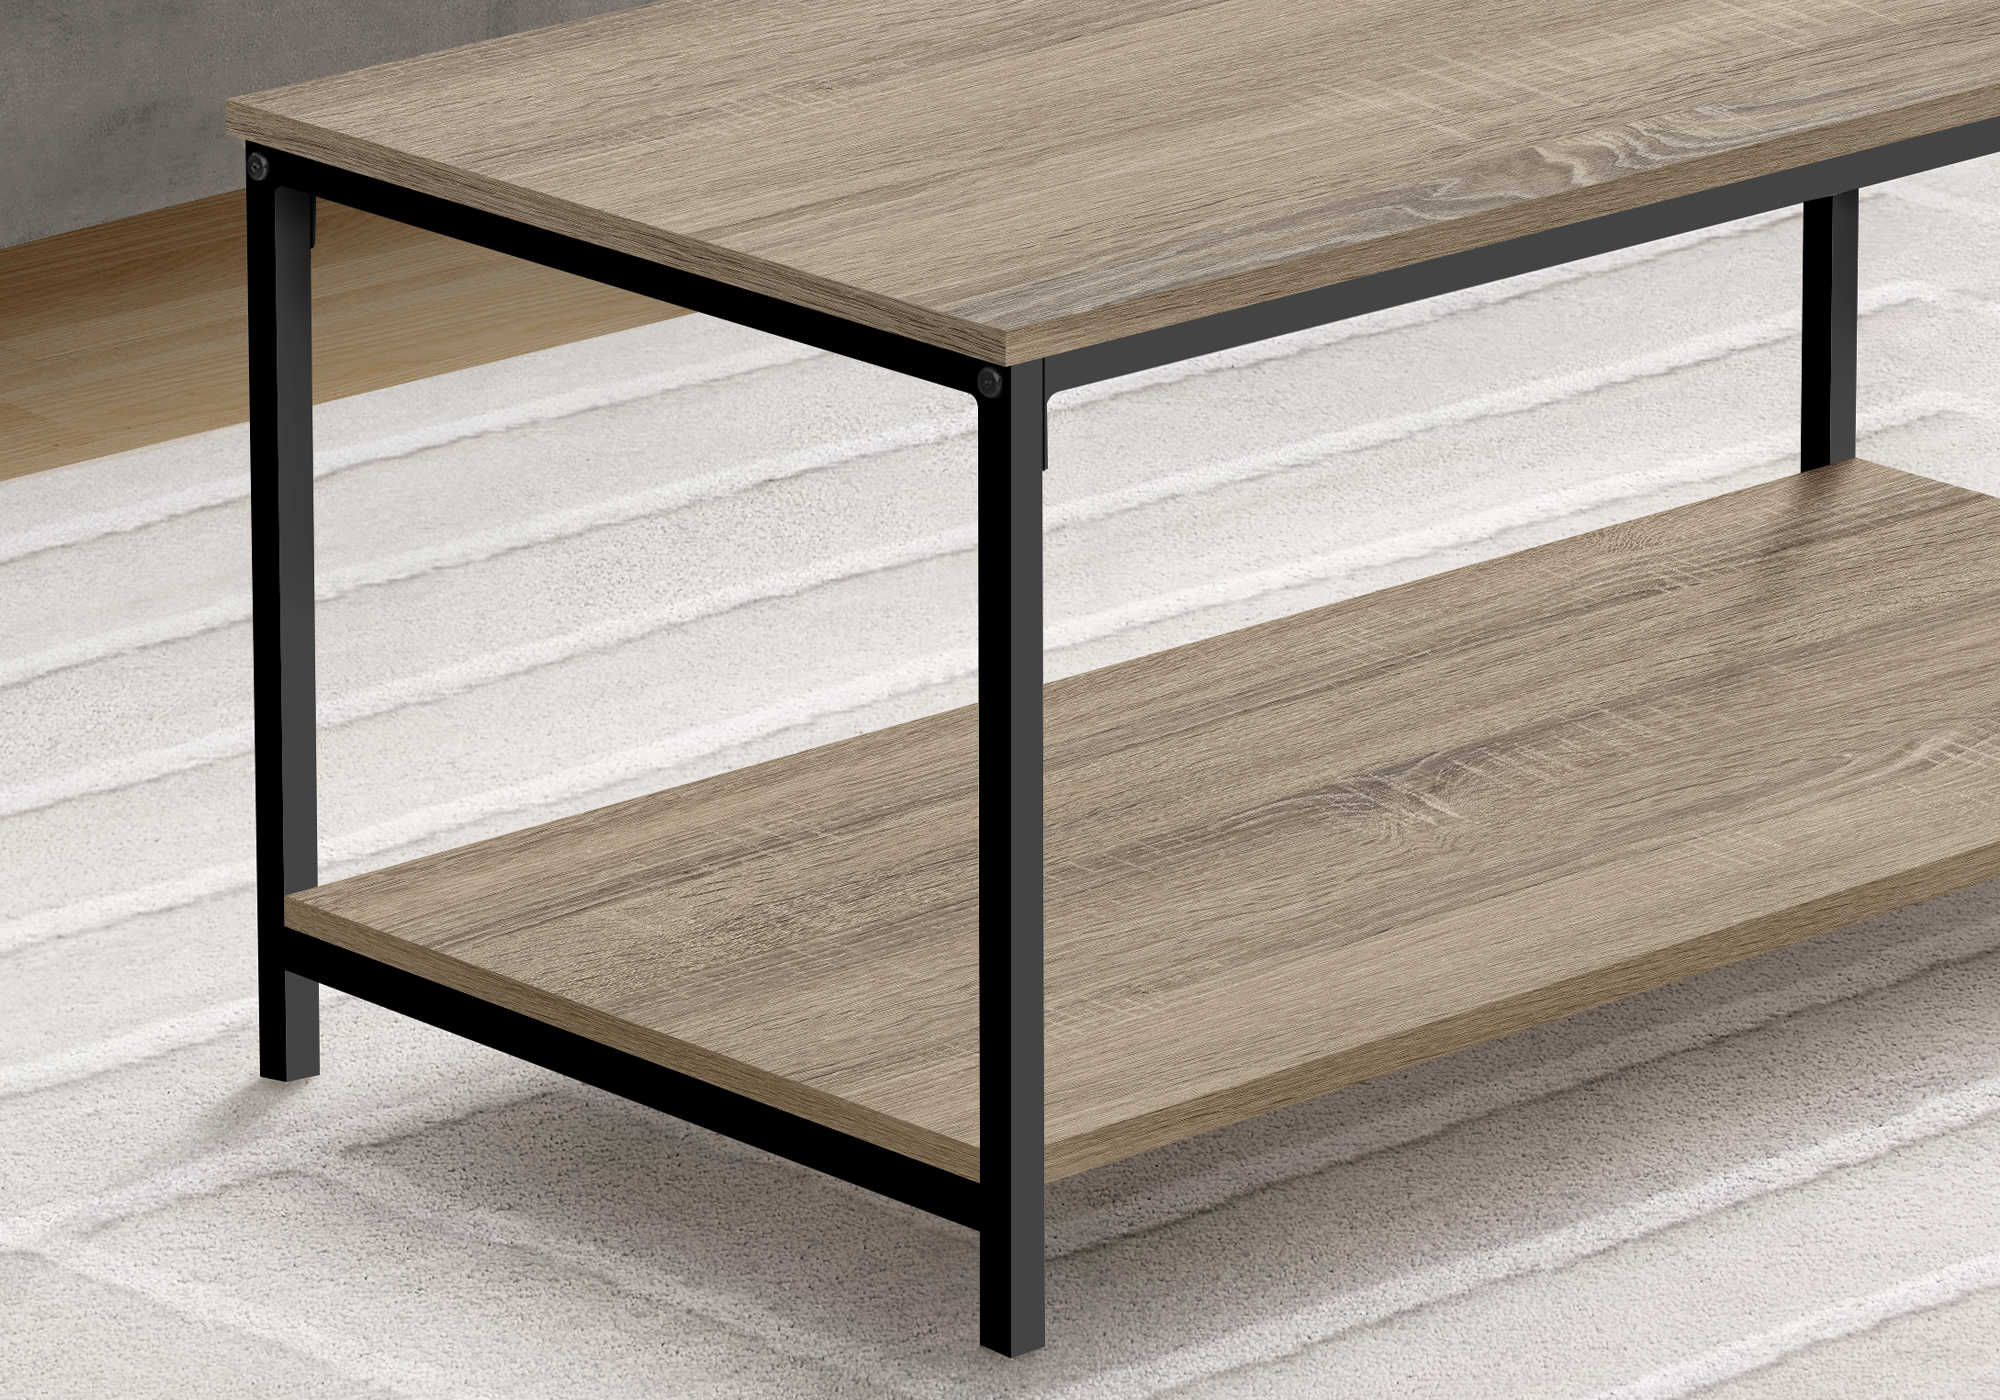 I 3802 - COFFEE TABLE - 40"L / DARK TAUPE / BLACK METAL BY MONARCH SPECIALTIES INC